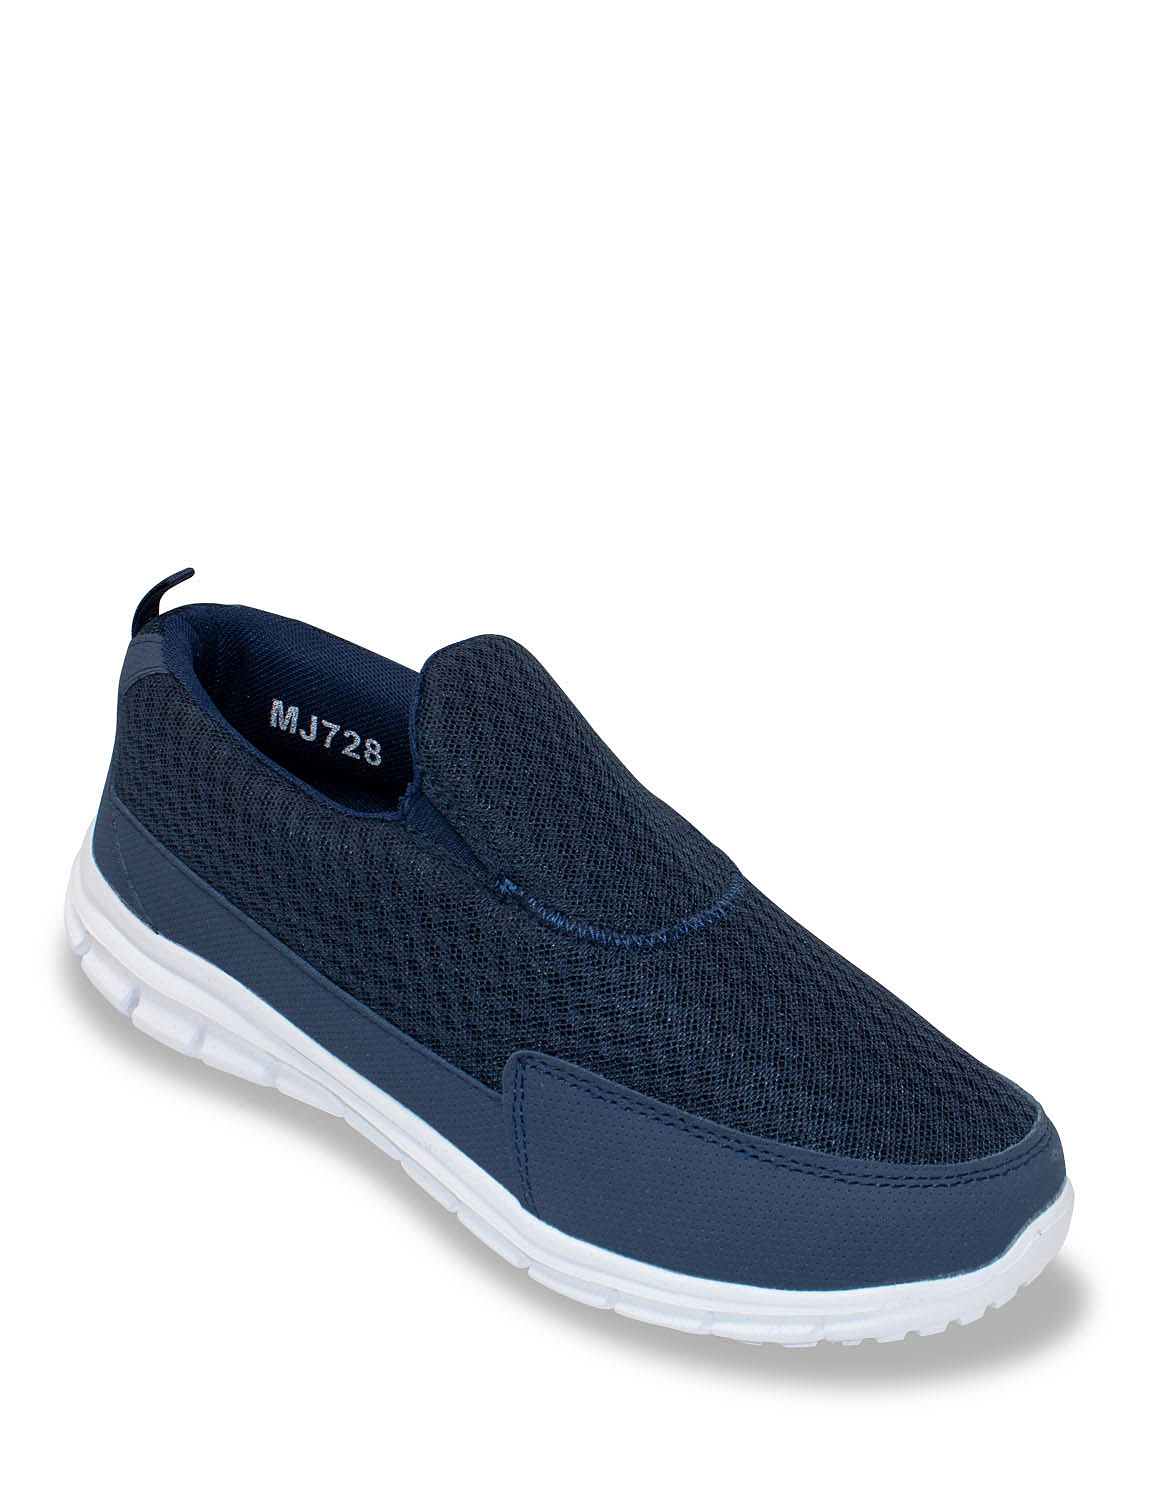 Pegasus Mesh Slip On Wide Fit Trainer | Chums